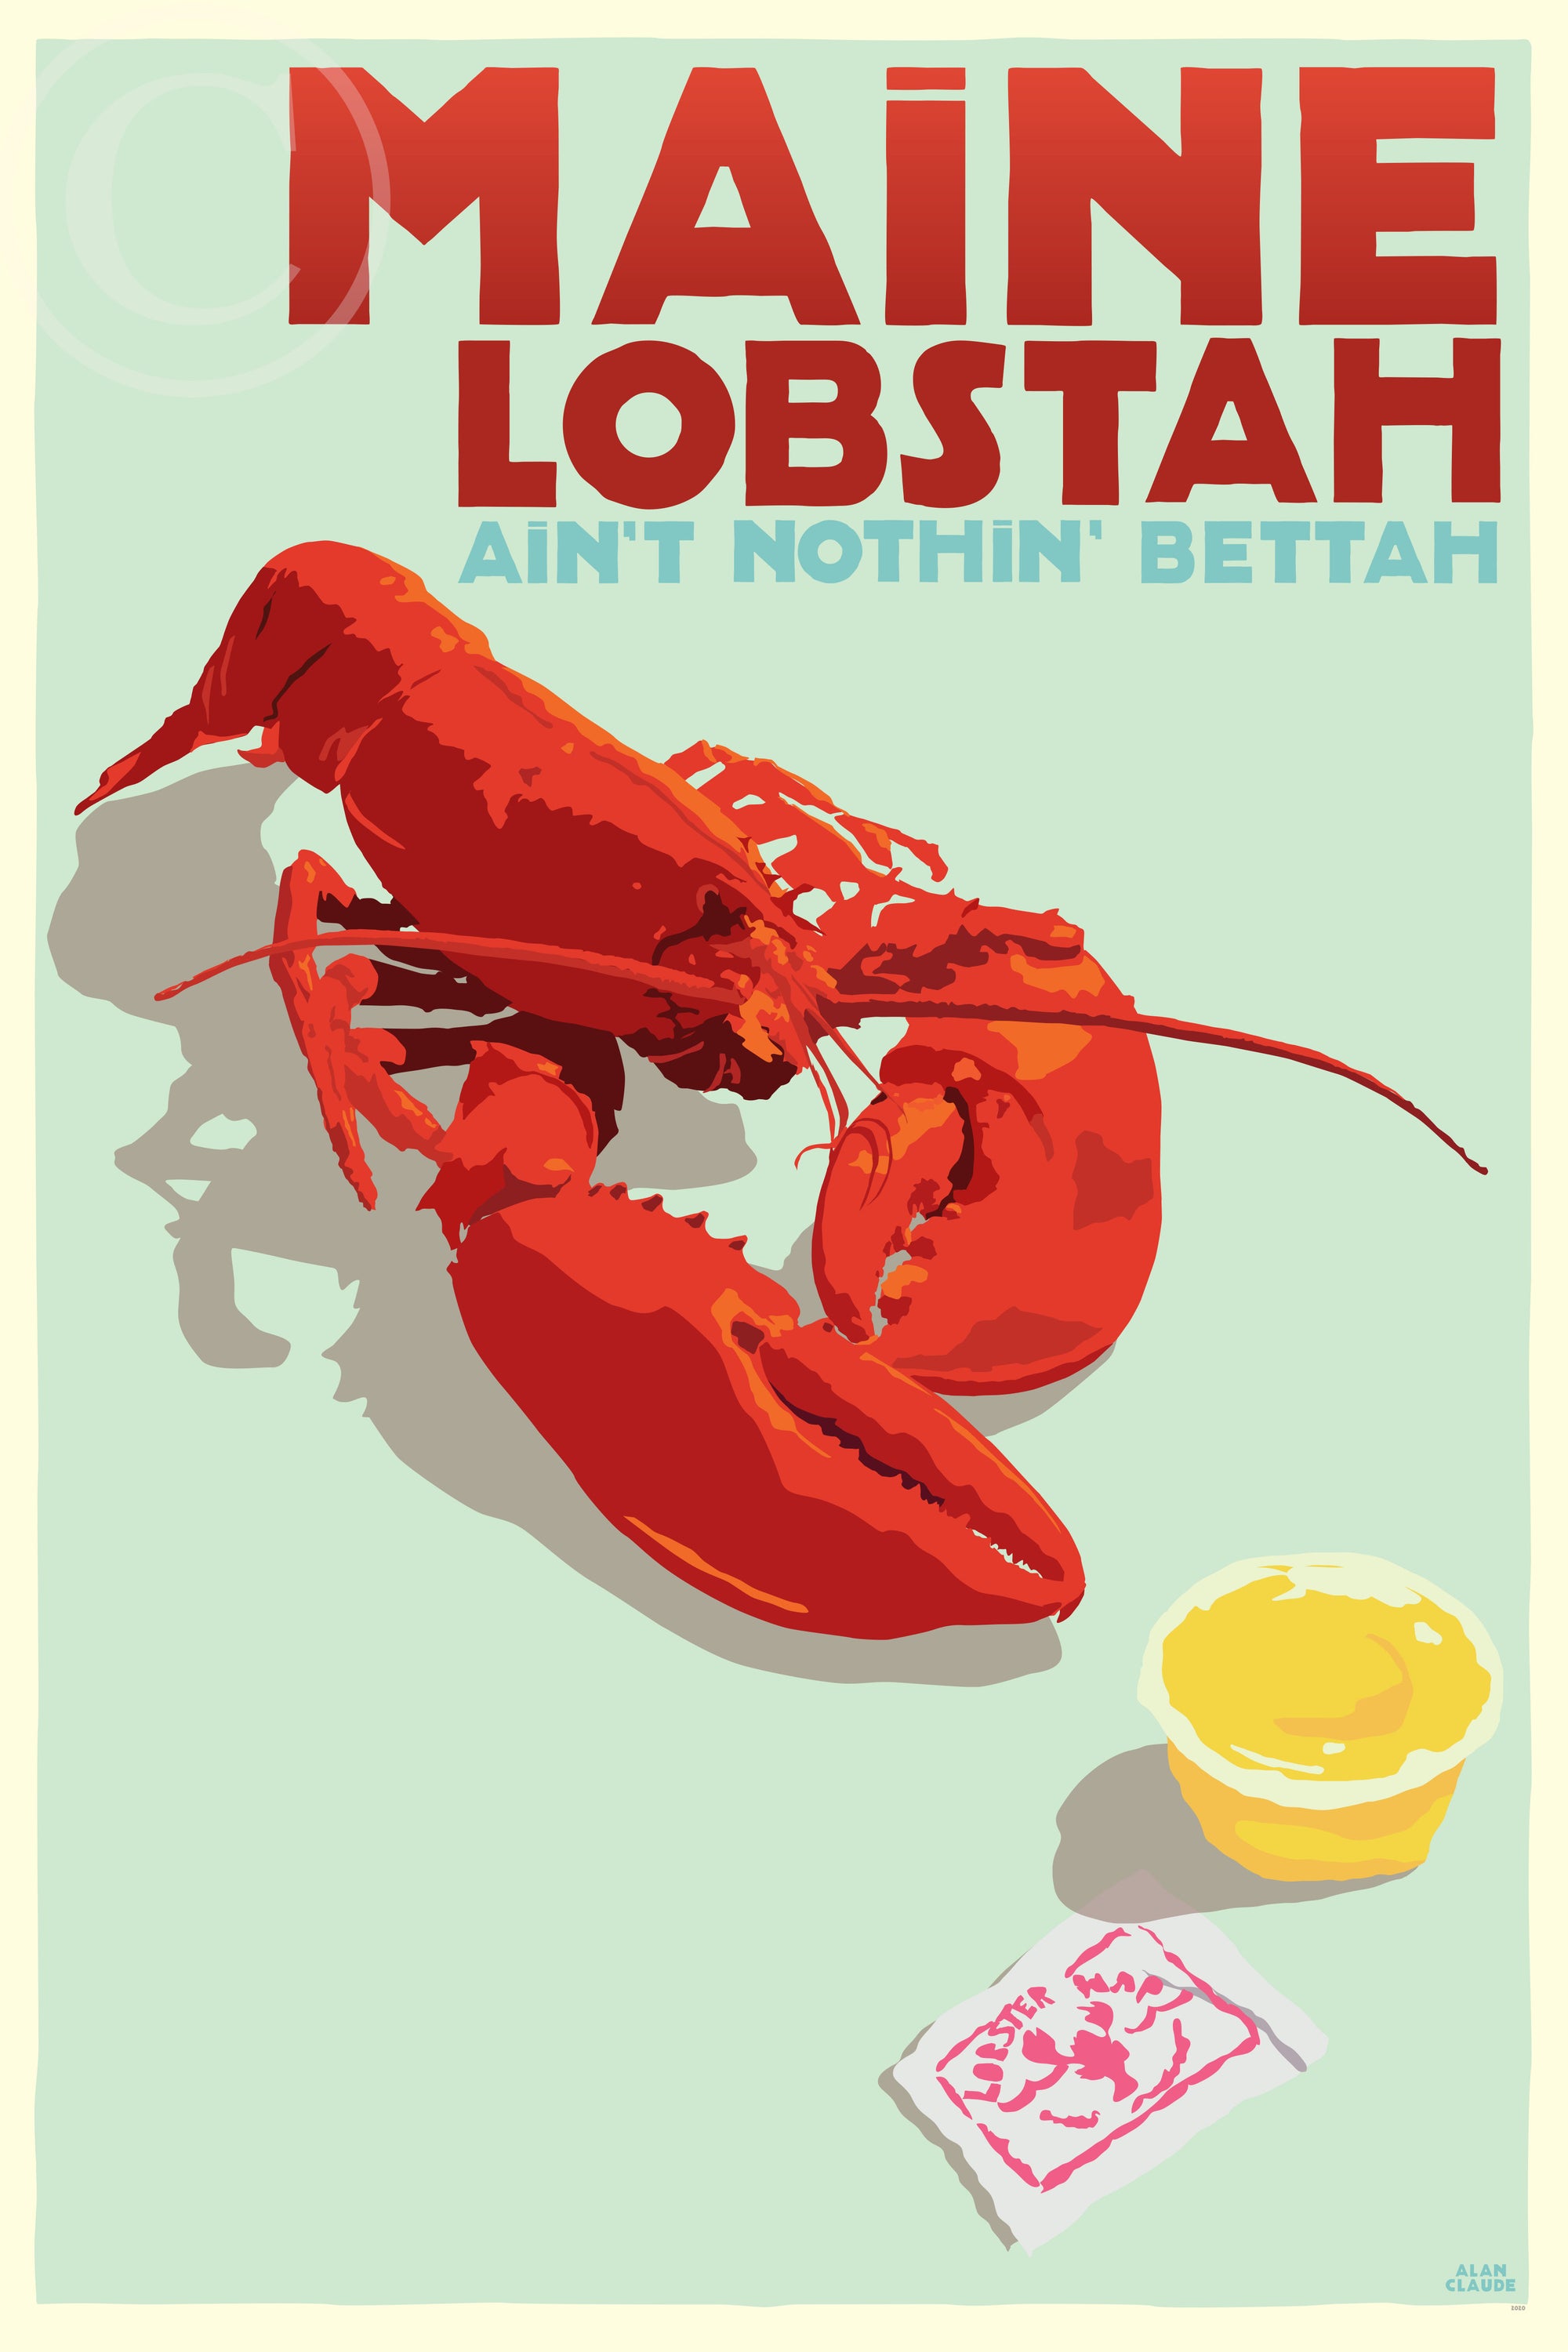 Maine Lobstah With Butter Art Print 24" x 36" Wall Poster By Alan Claude - Maine